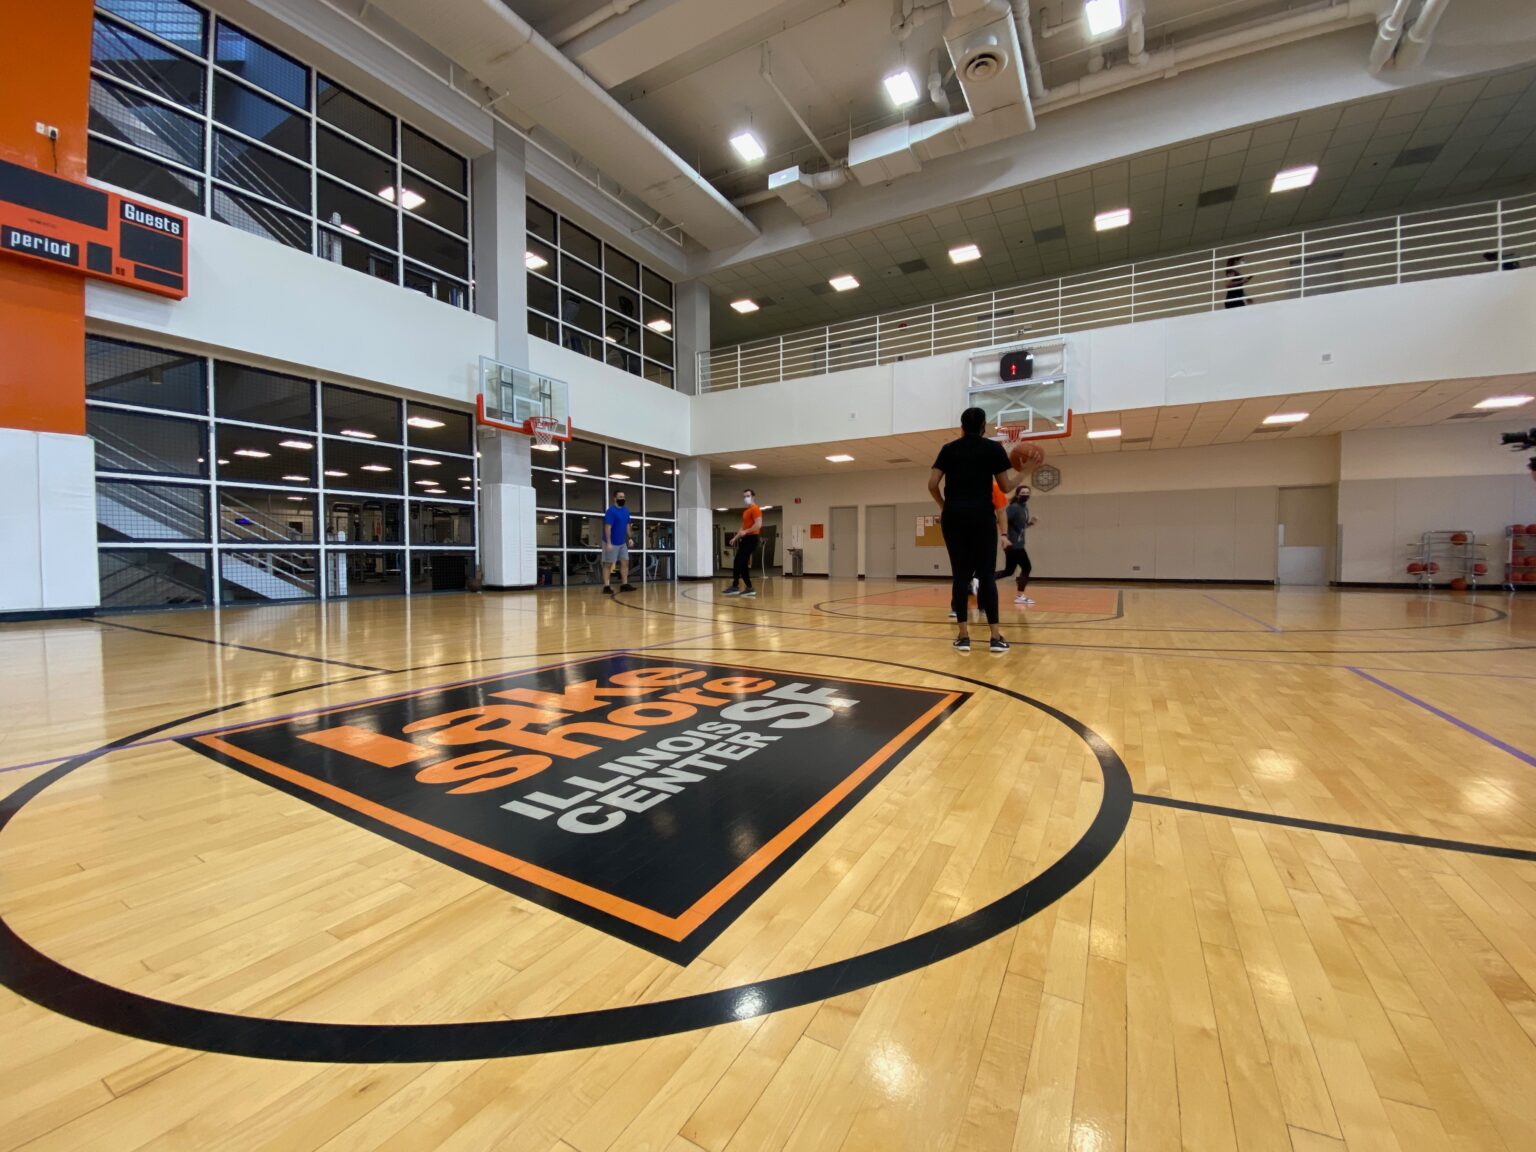 Basketball Courts Near Me - Gyms Near Me | Lakeshore Sports & Fitness